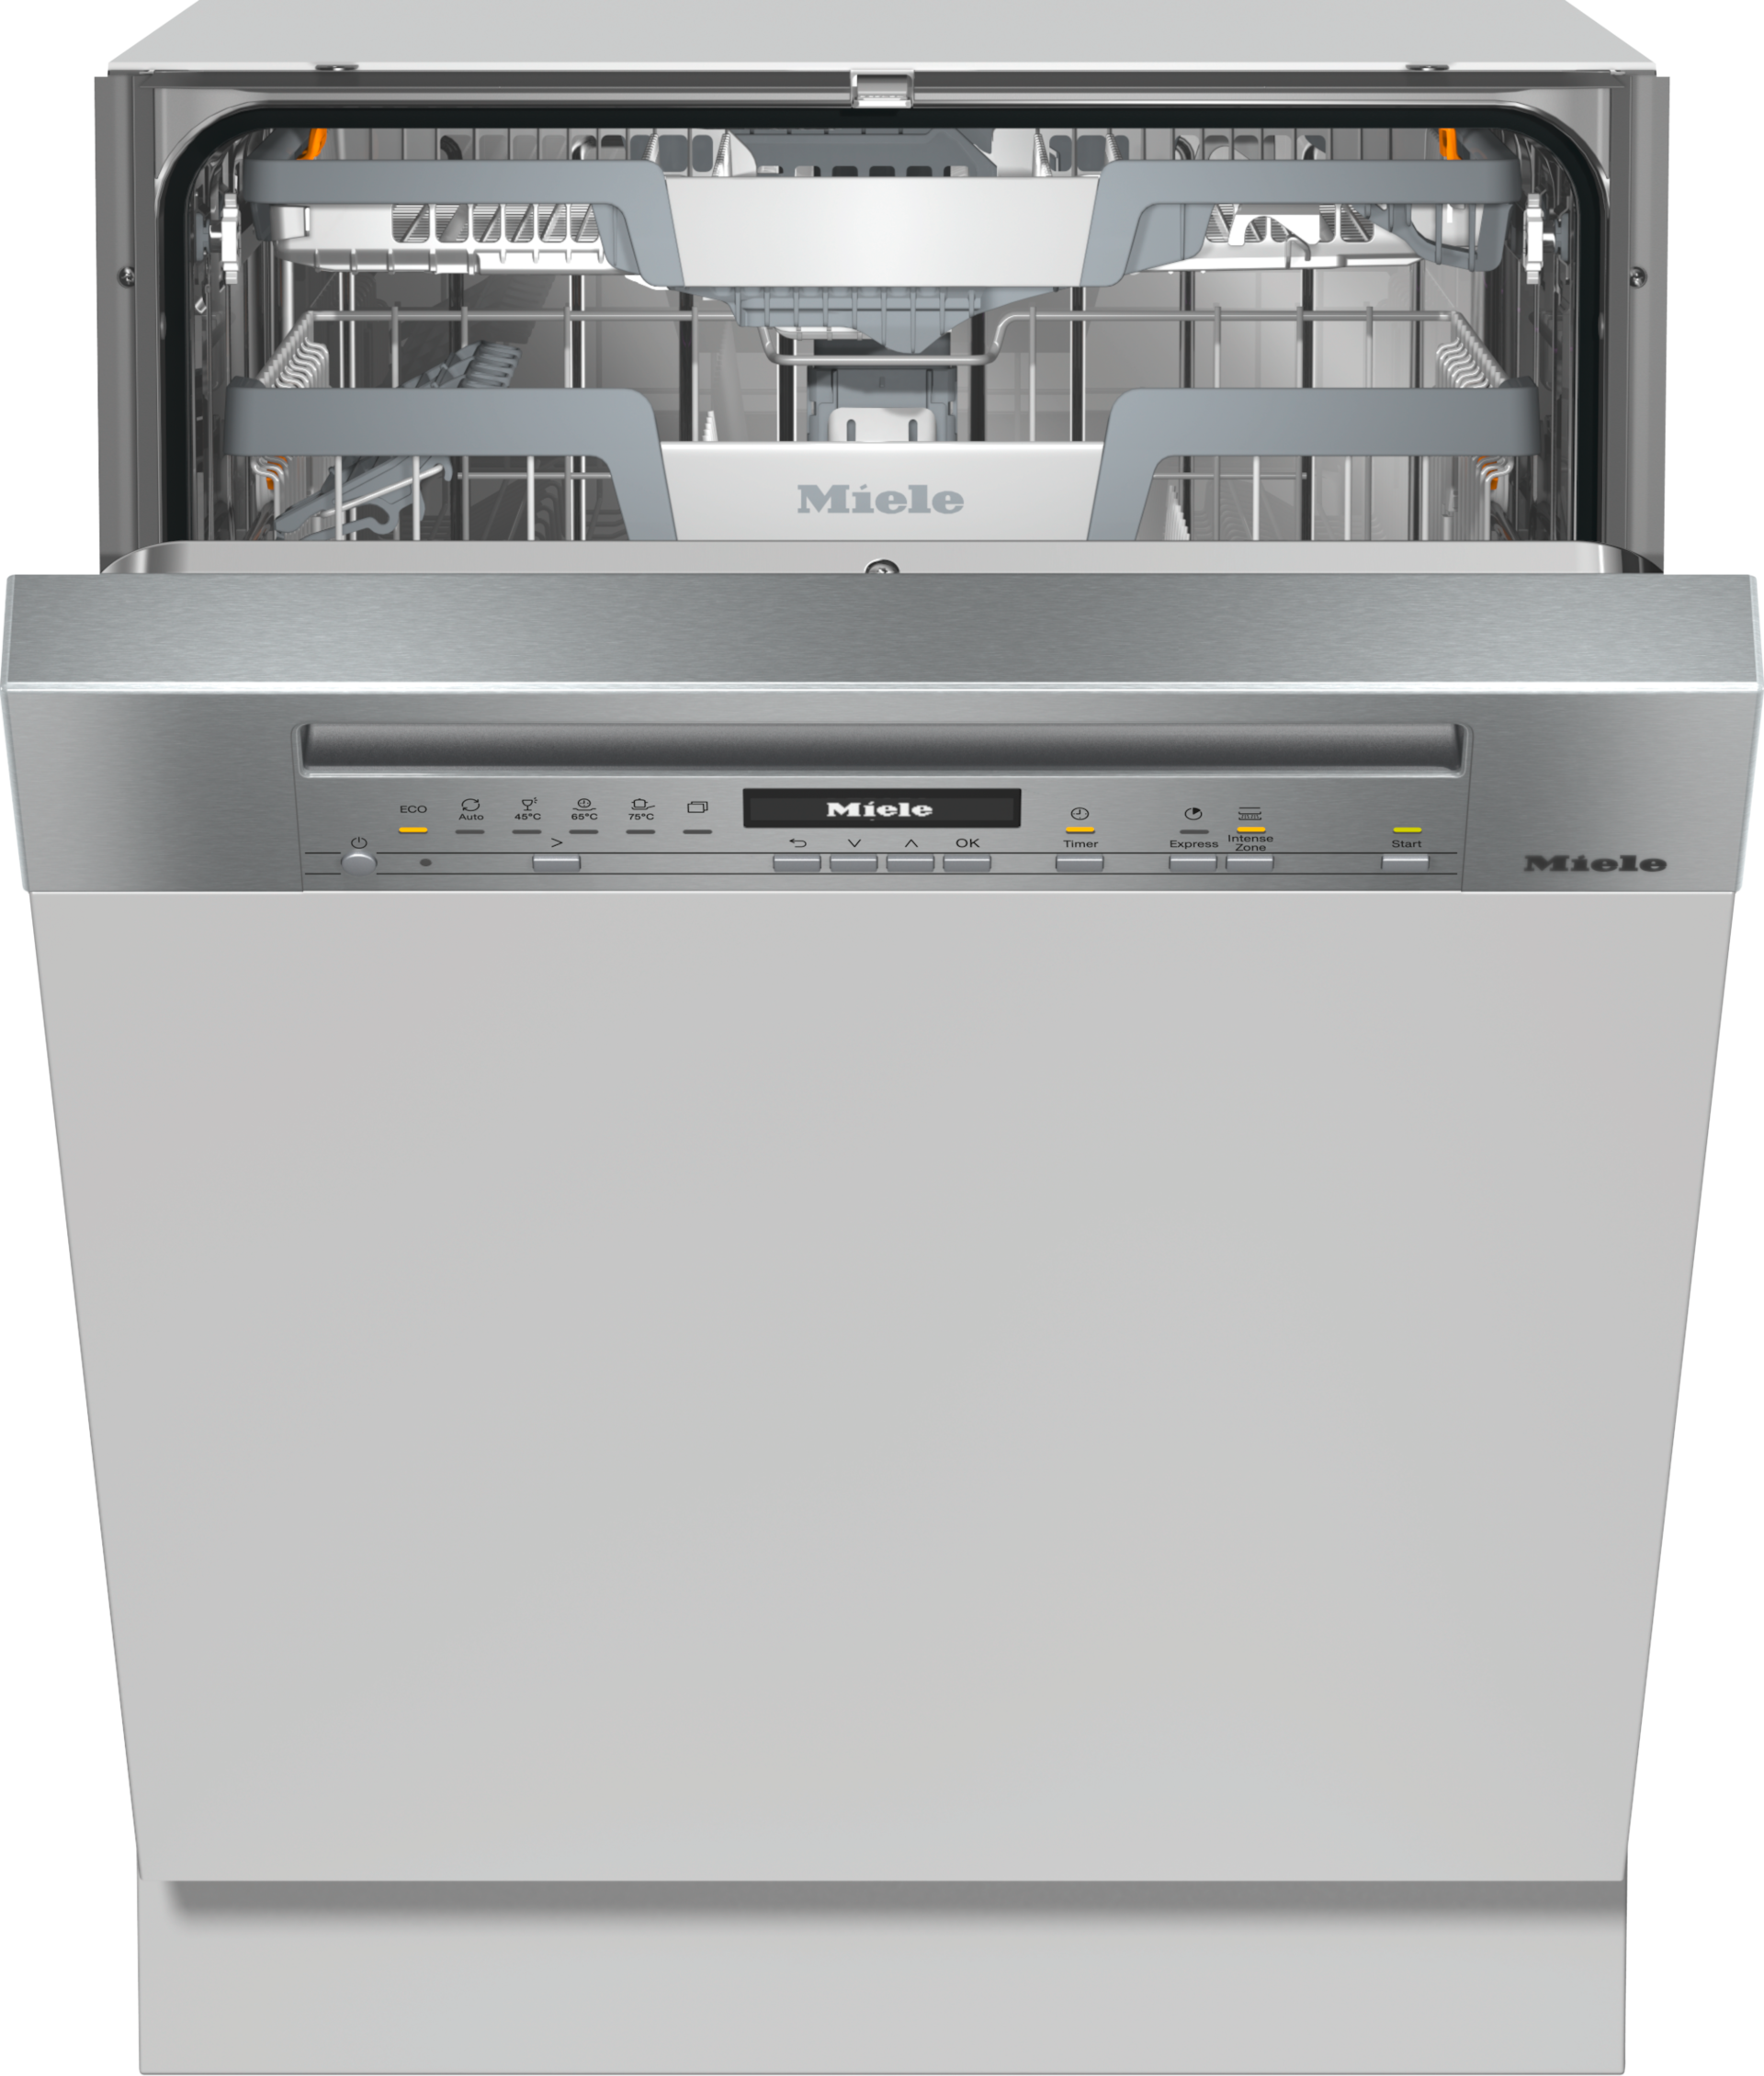 Dishwashers - G 7200 SCi Stainless steel/CleanSteel - 2